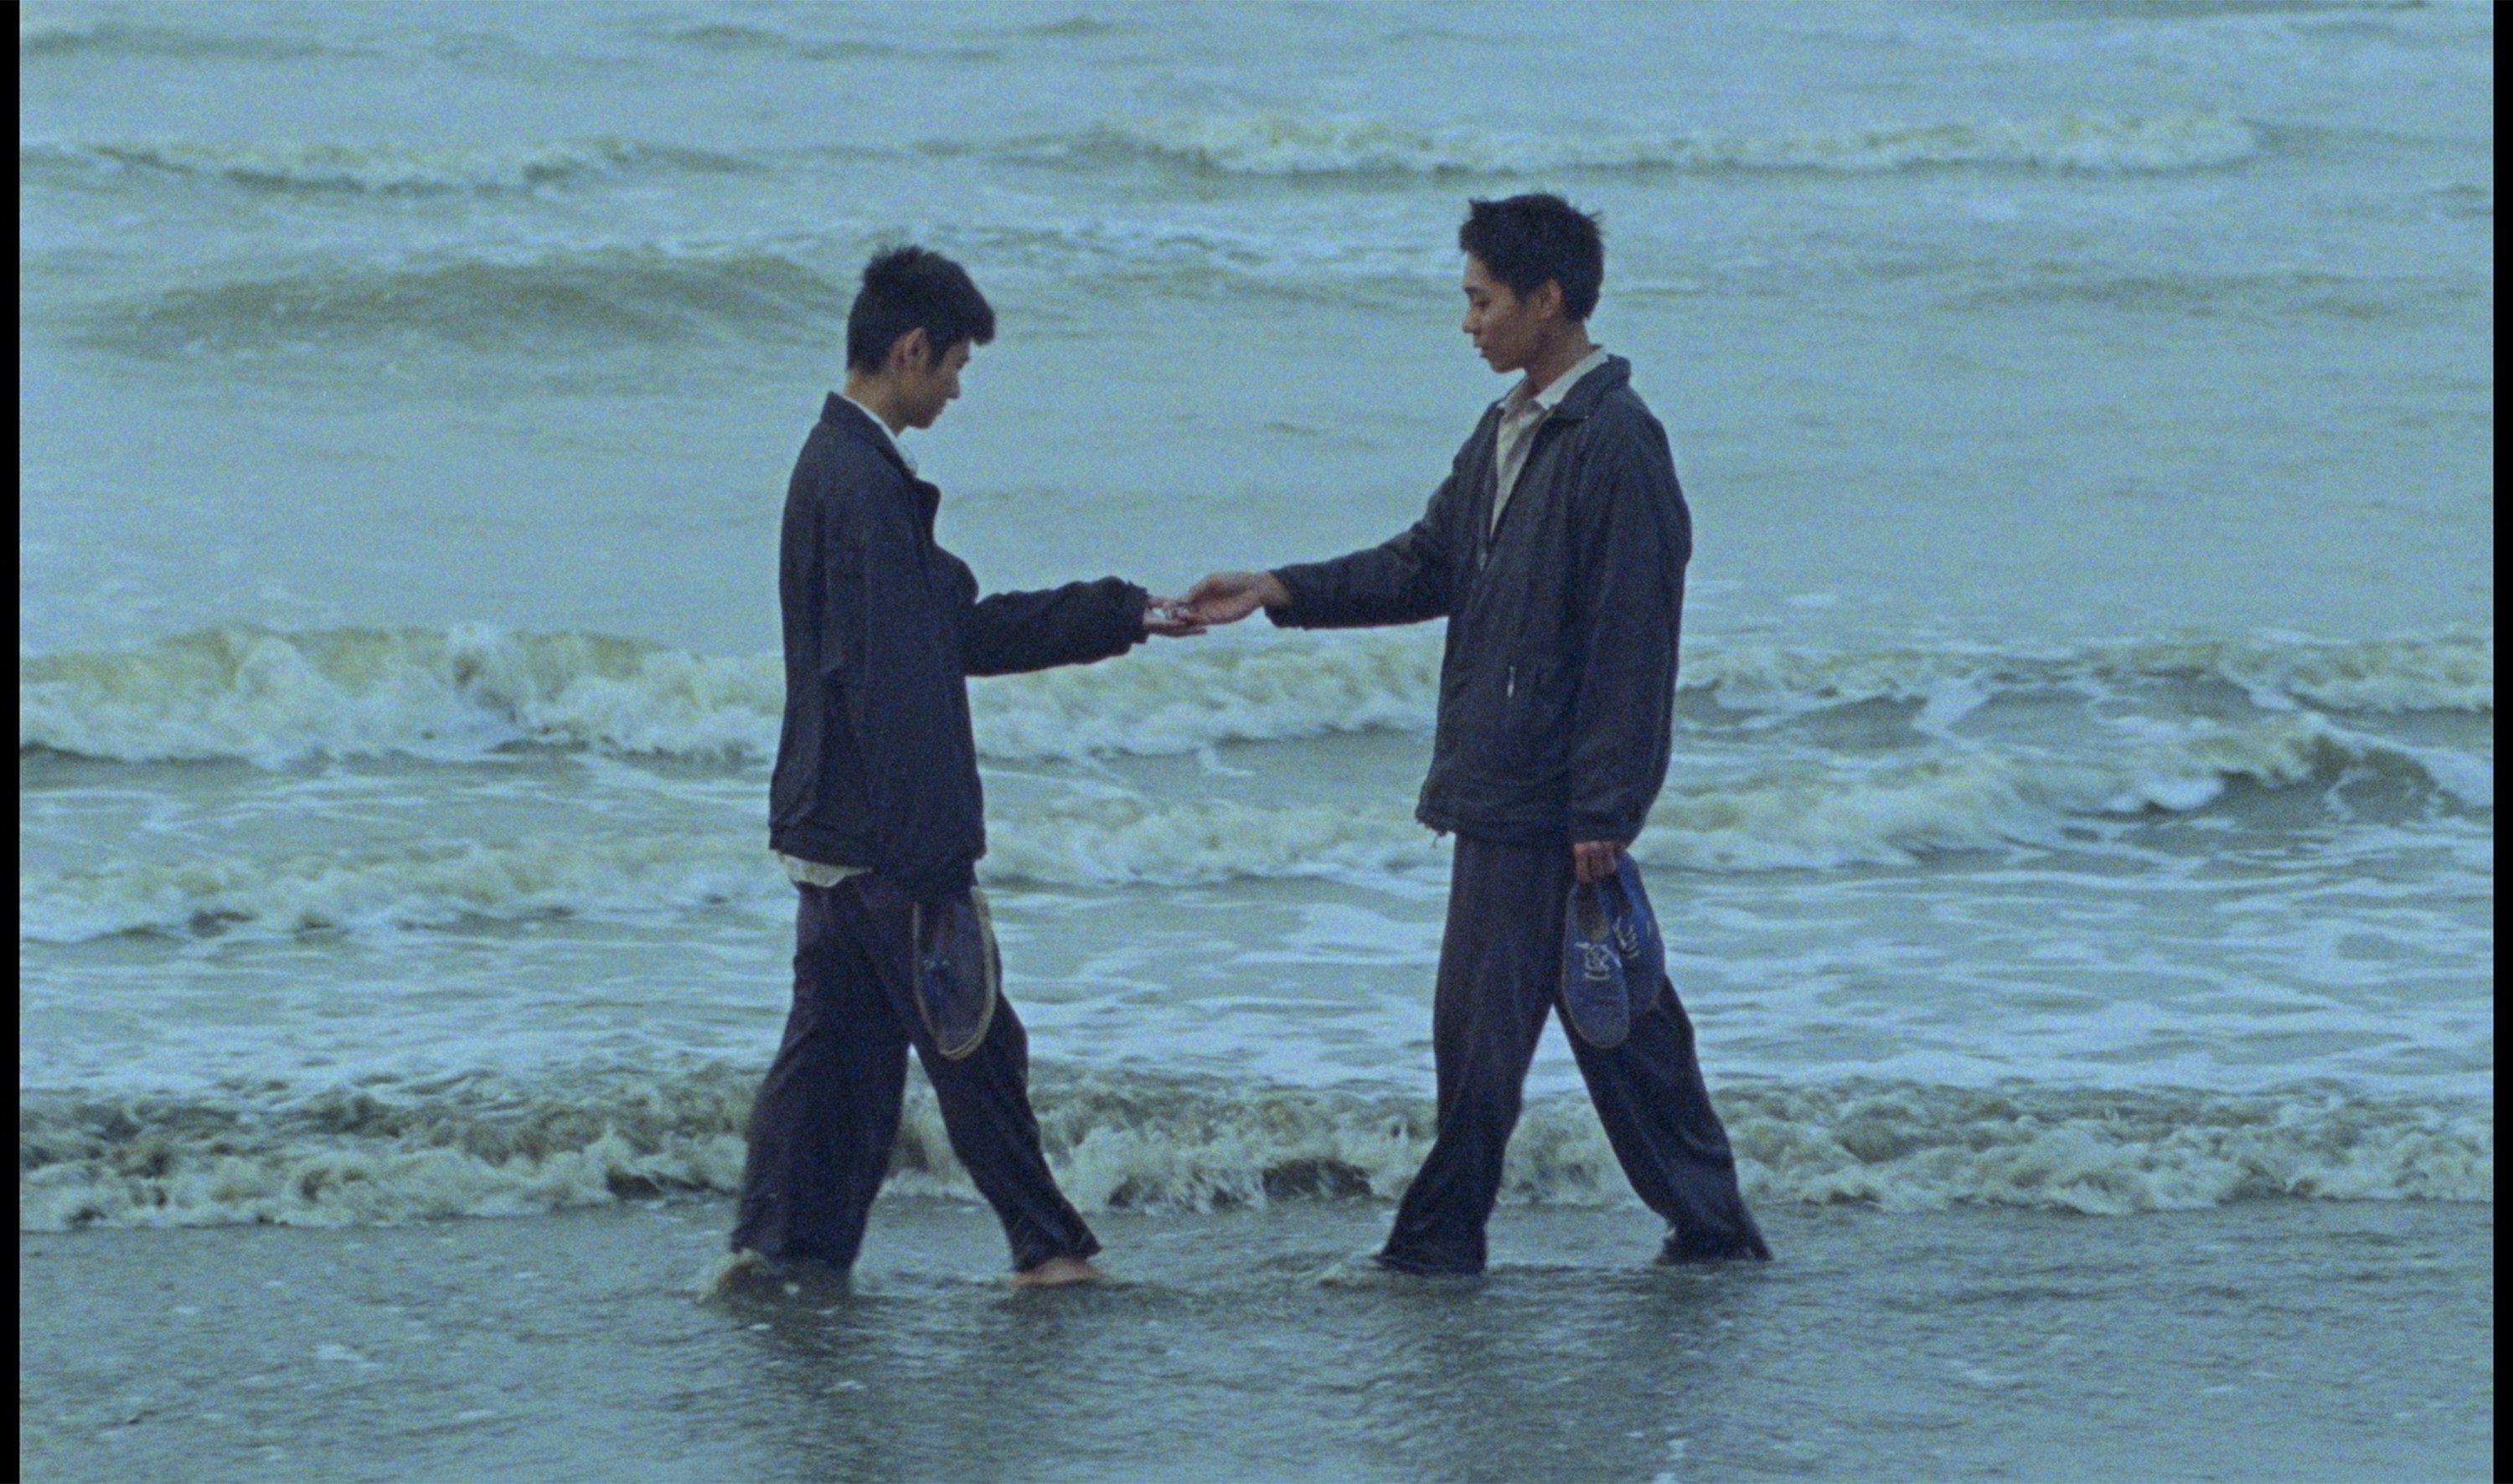 A still from Viet and Nam, directed by Minh Quy Truong, and starring Duy Bao Dinh Dao and Thanh Hai Pham.